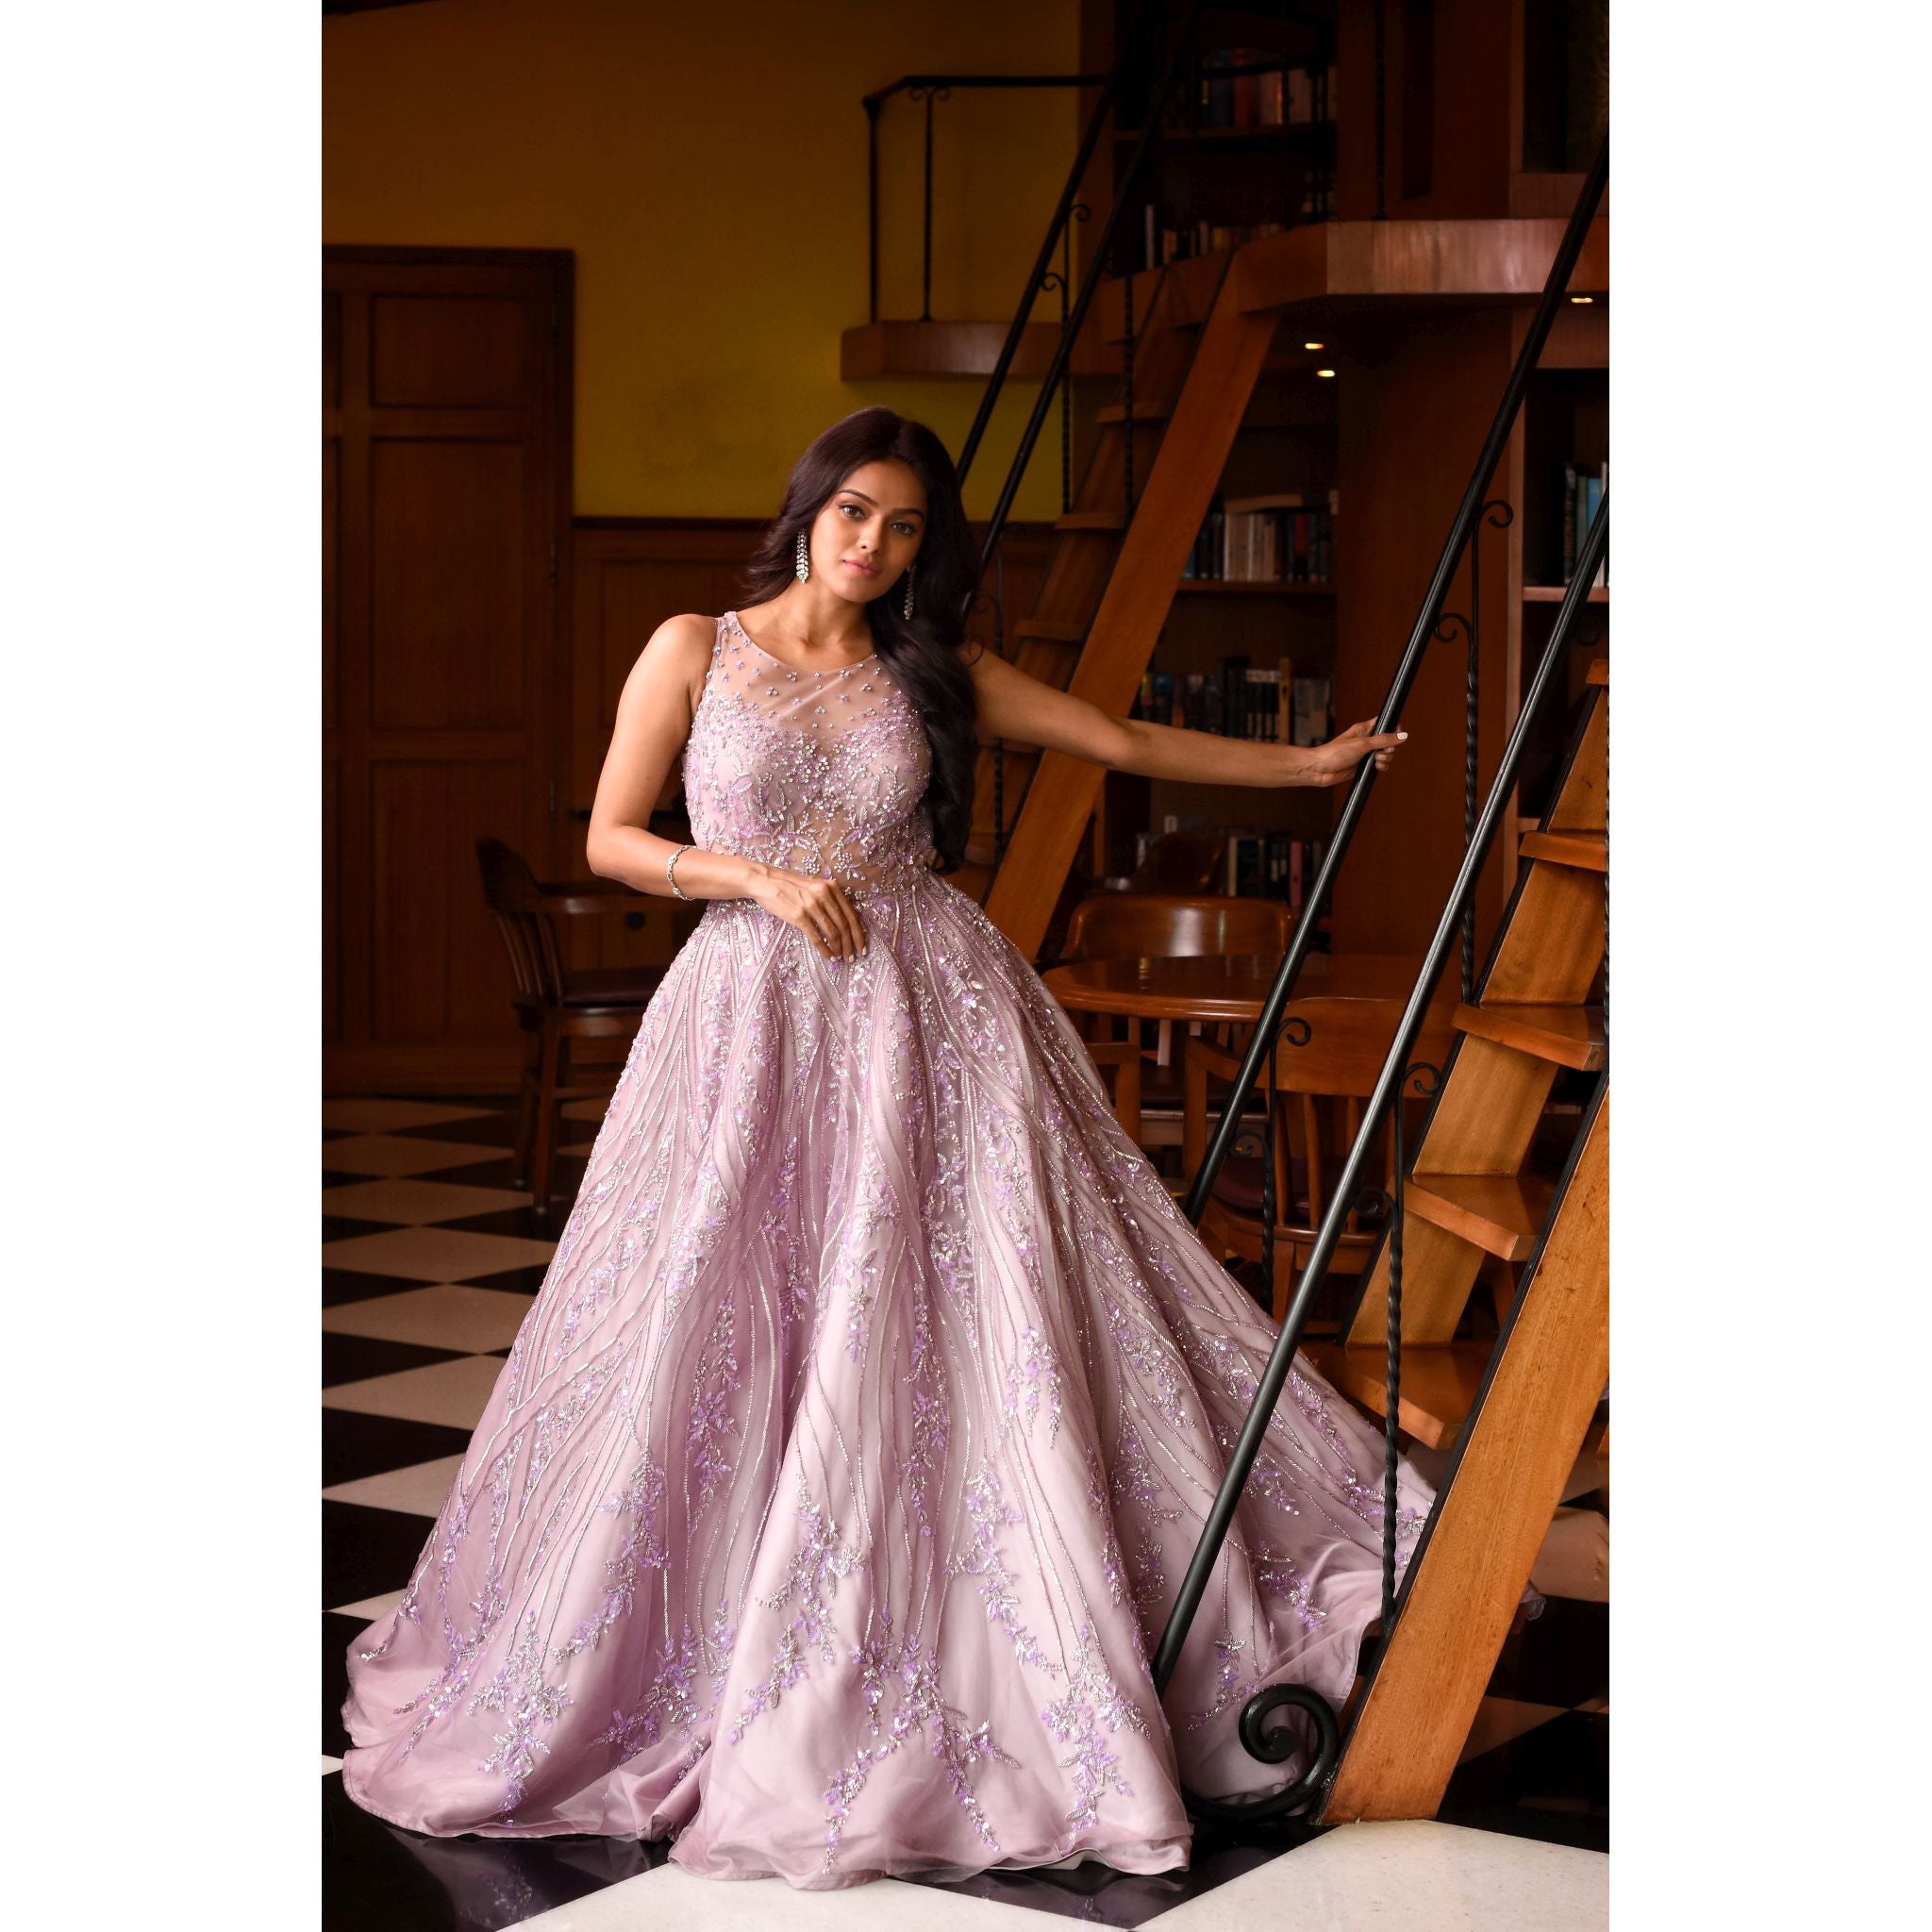 Lilac Gown - Indian Designer Bridal Wedding Outfit